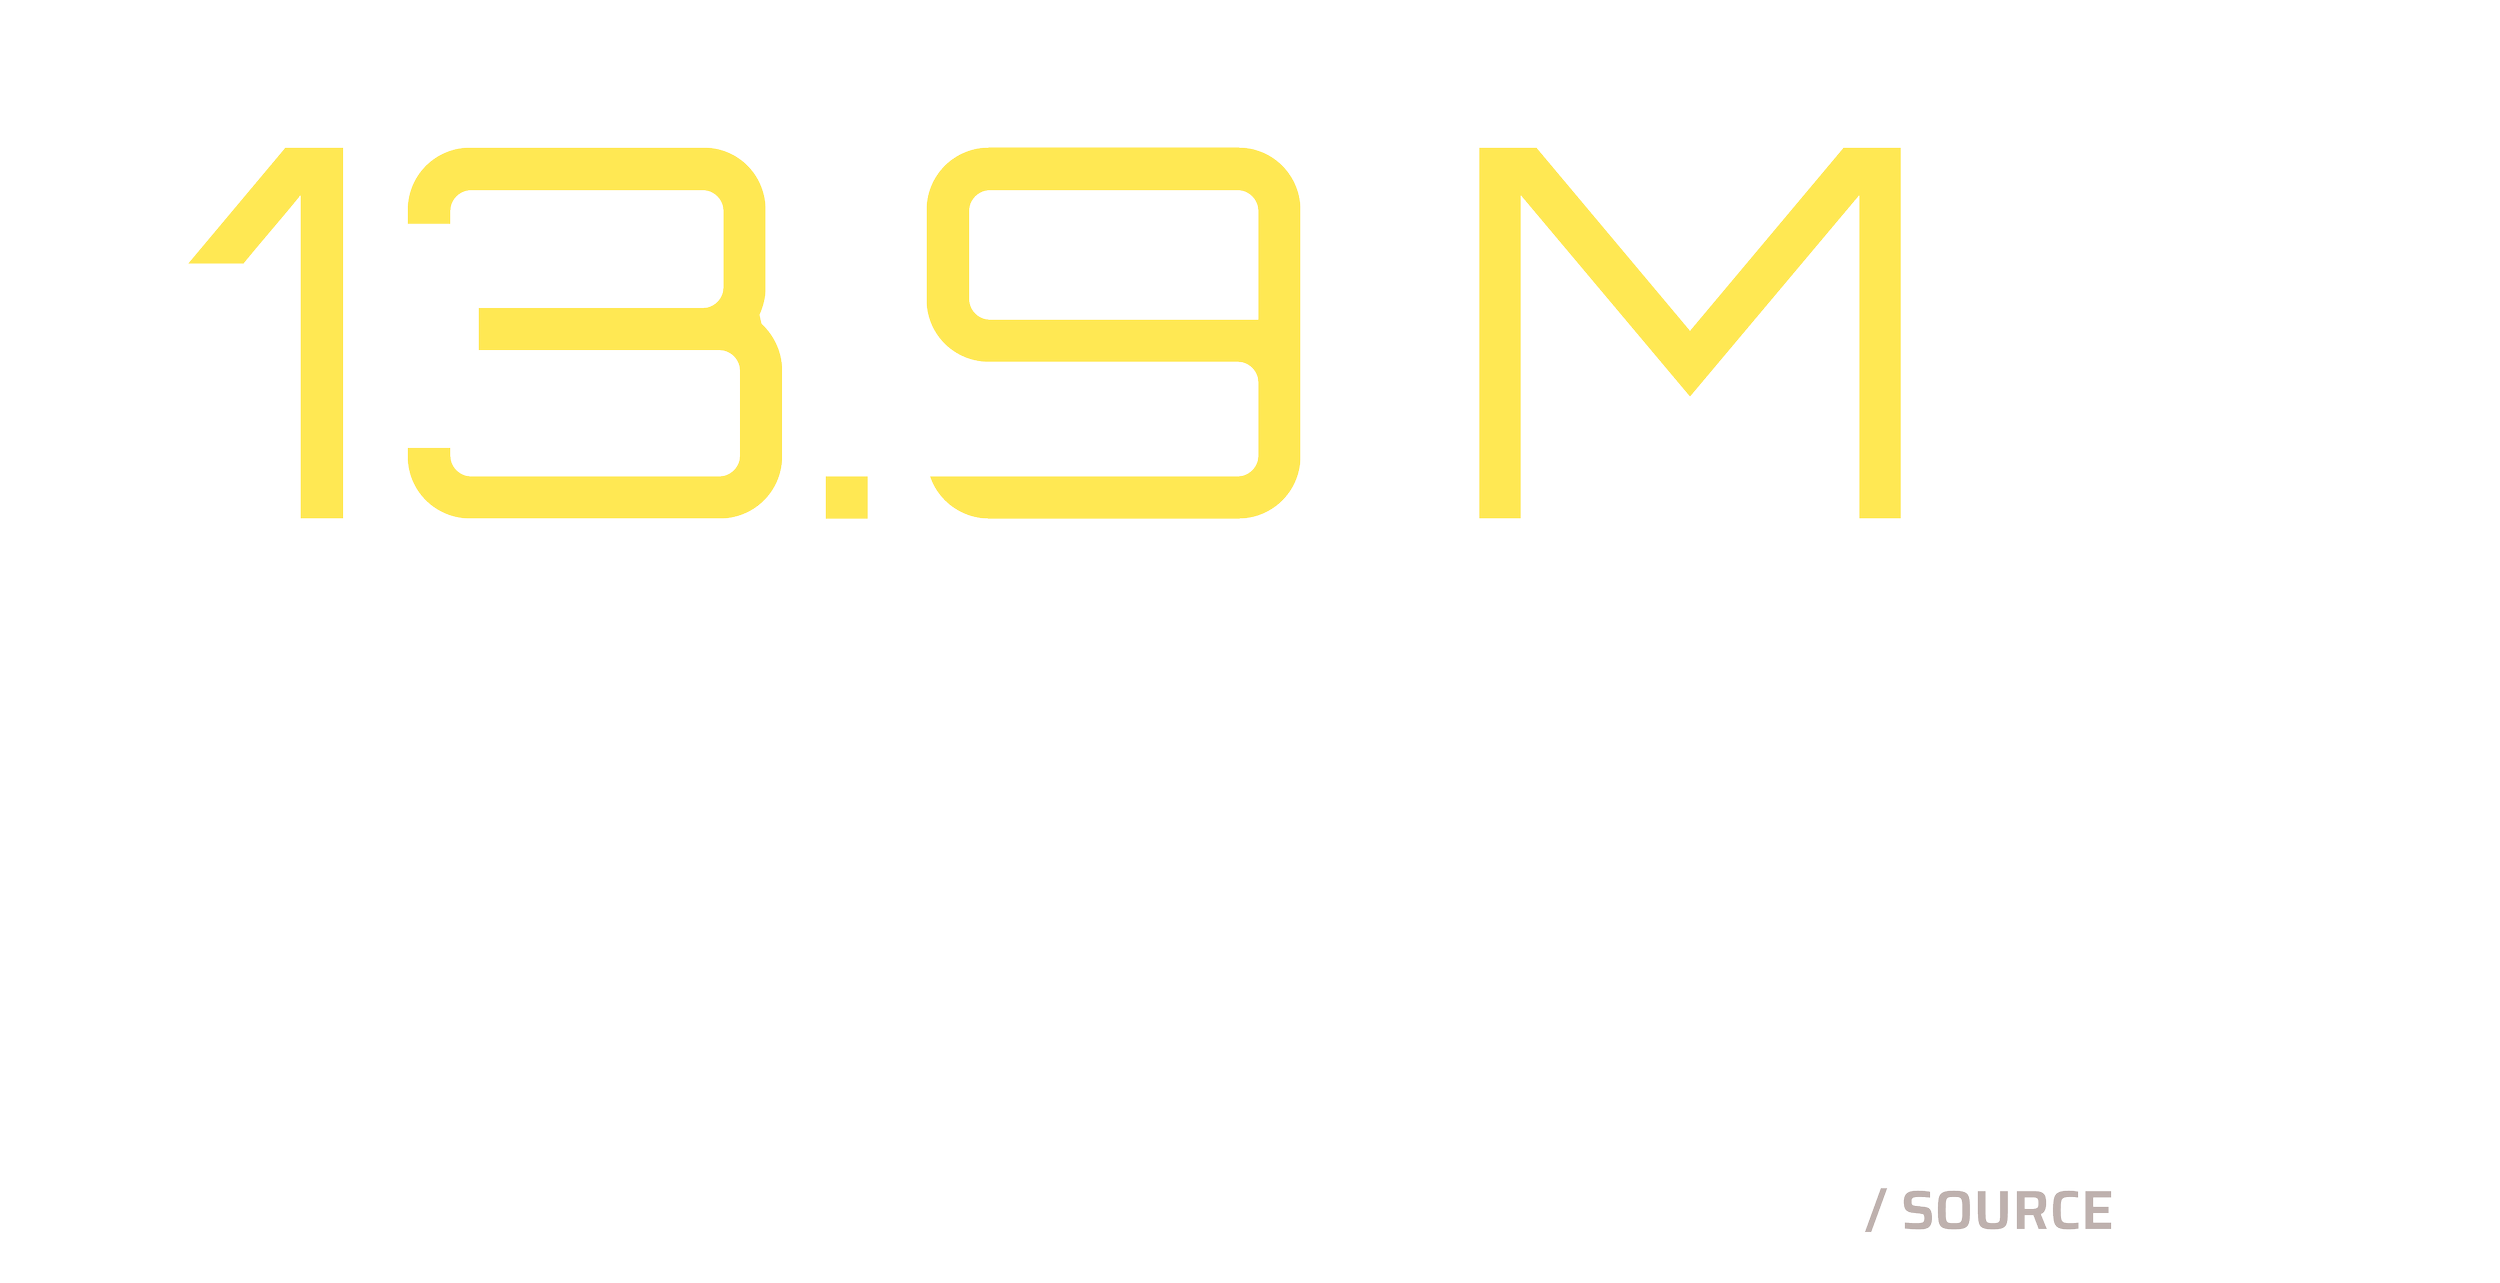  Text reading: Projected number of Americans with Alzheimer’s dementia in 2060:  13.9 million.  Click for data source link. 